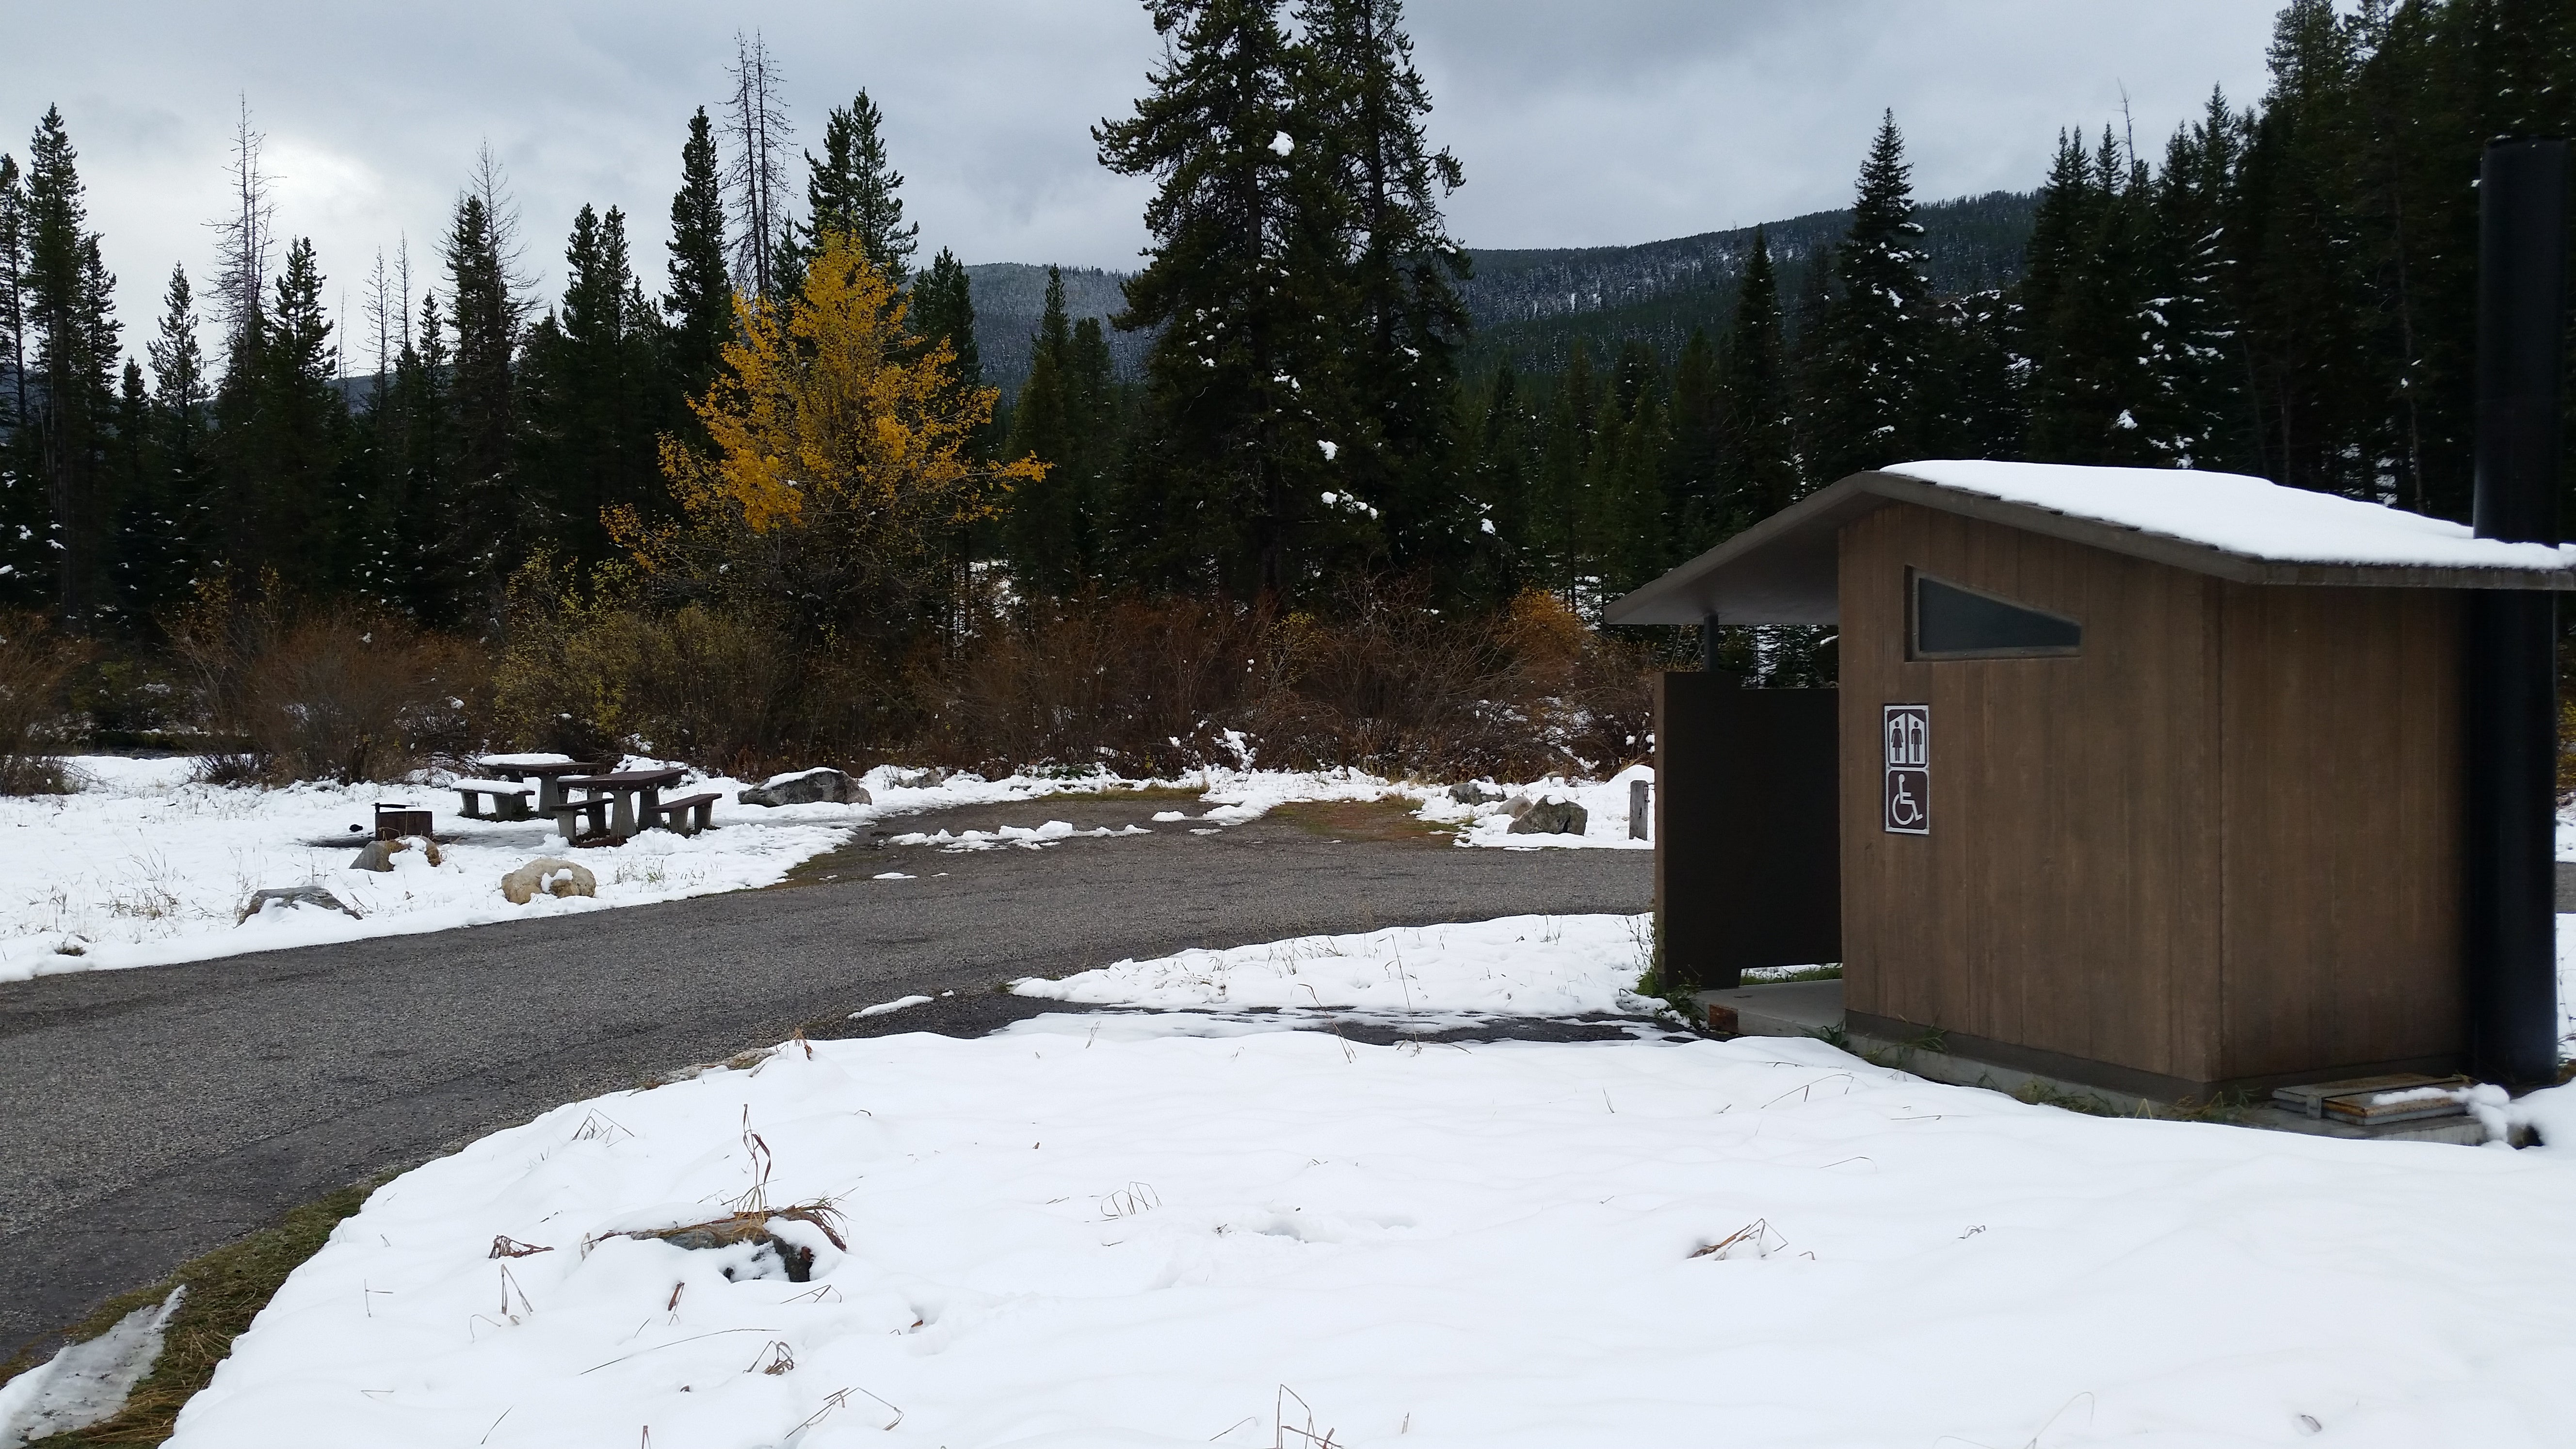 Vault toilet and site 17 with two picnic tables